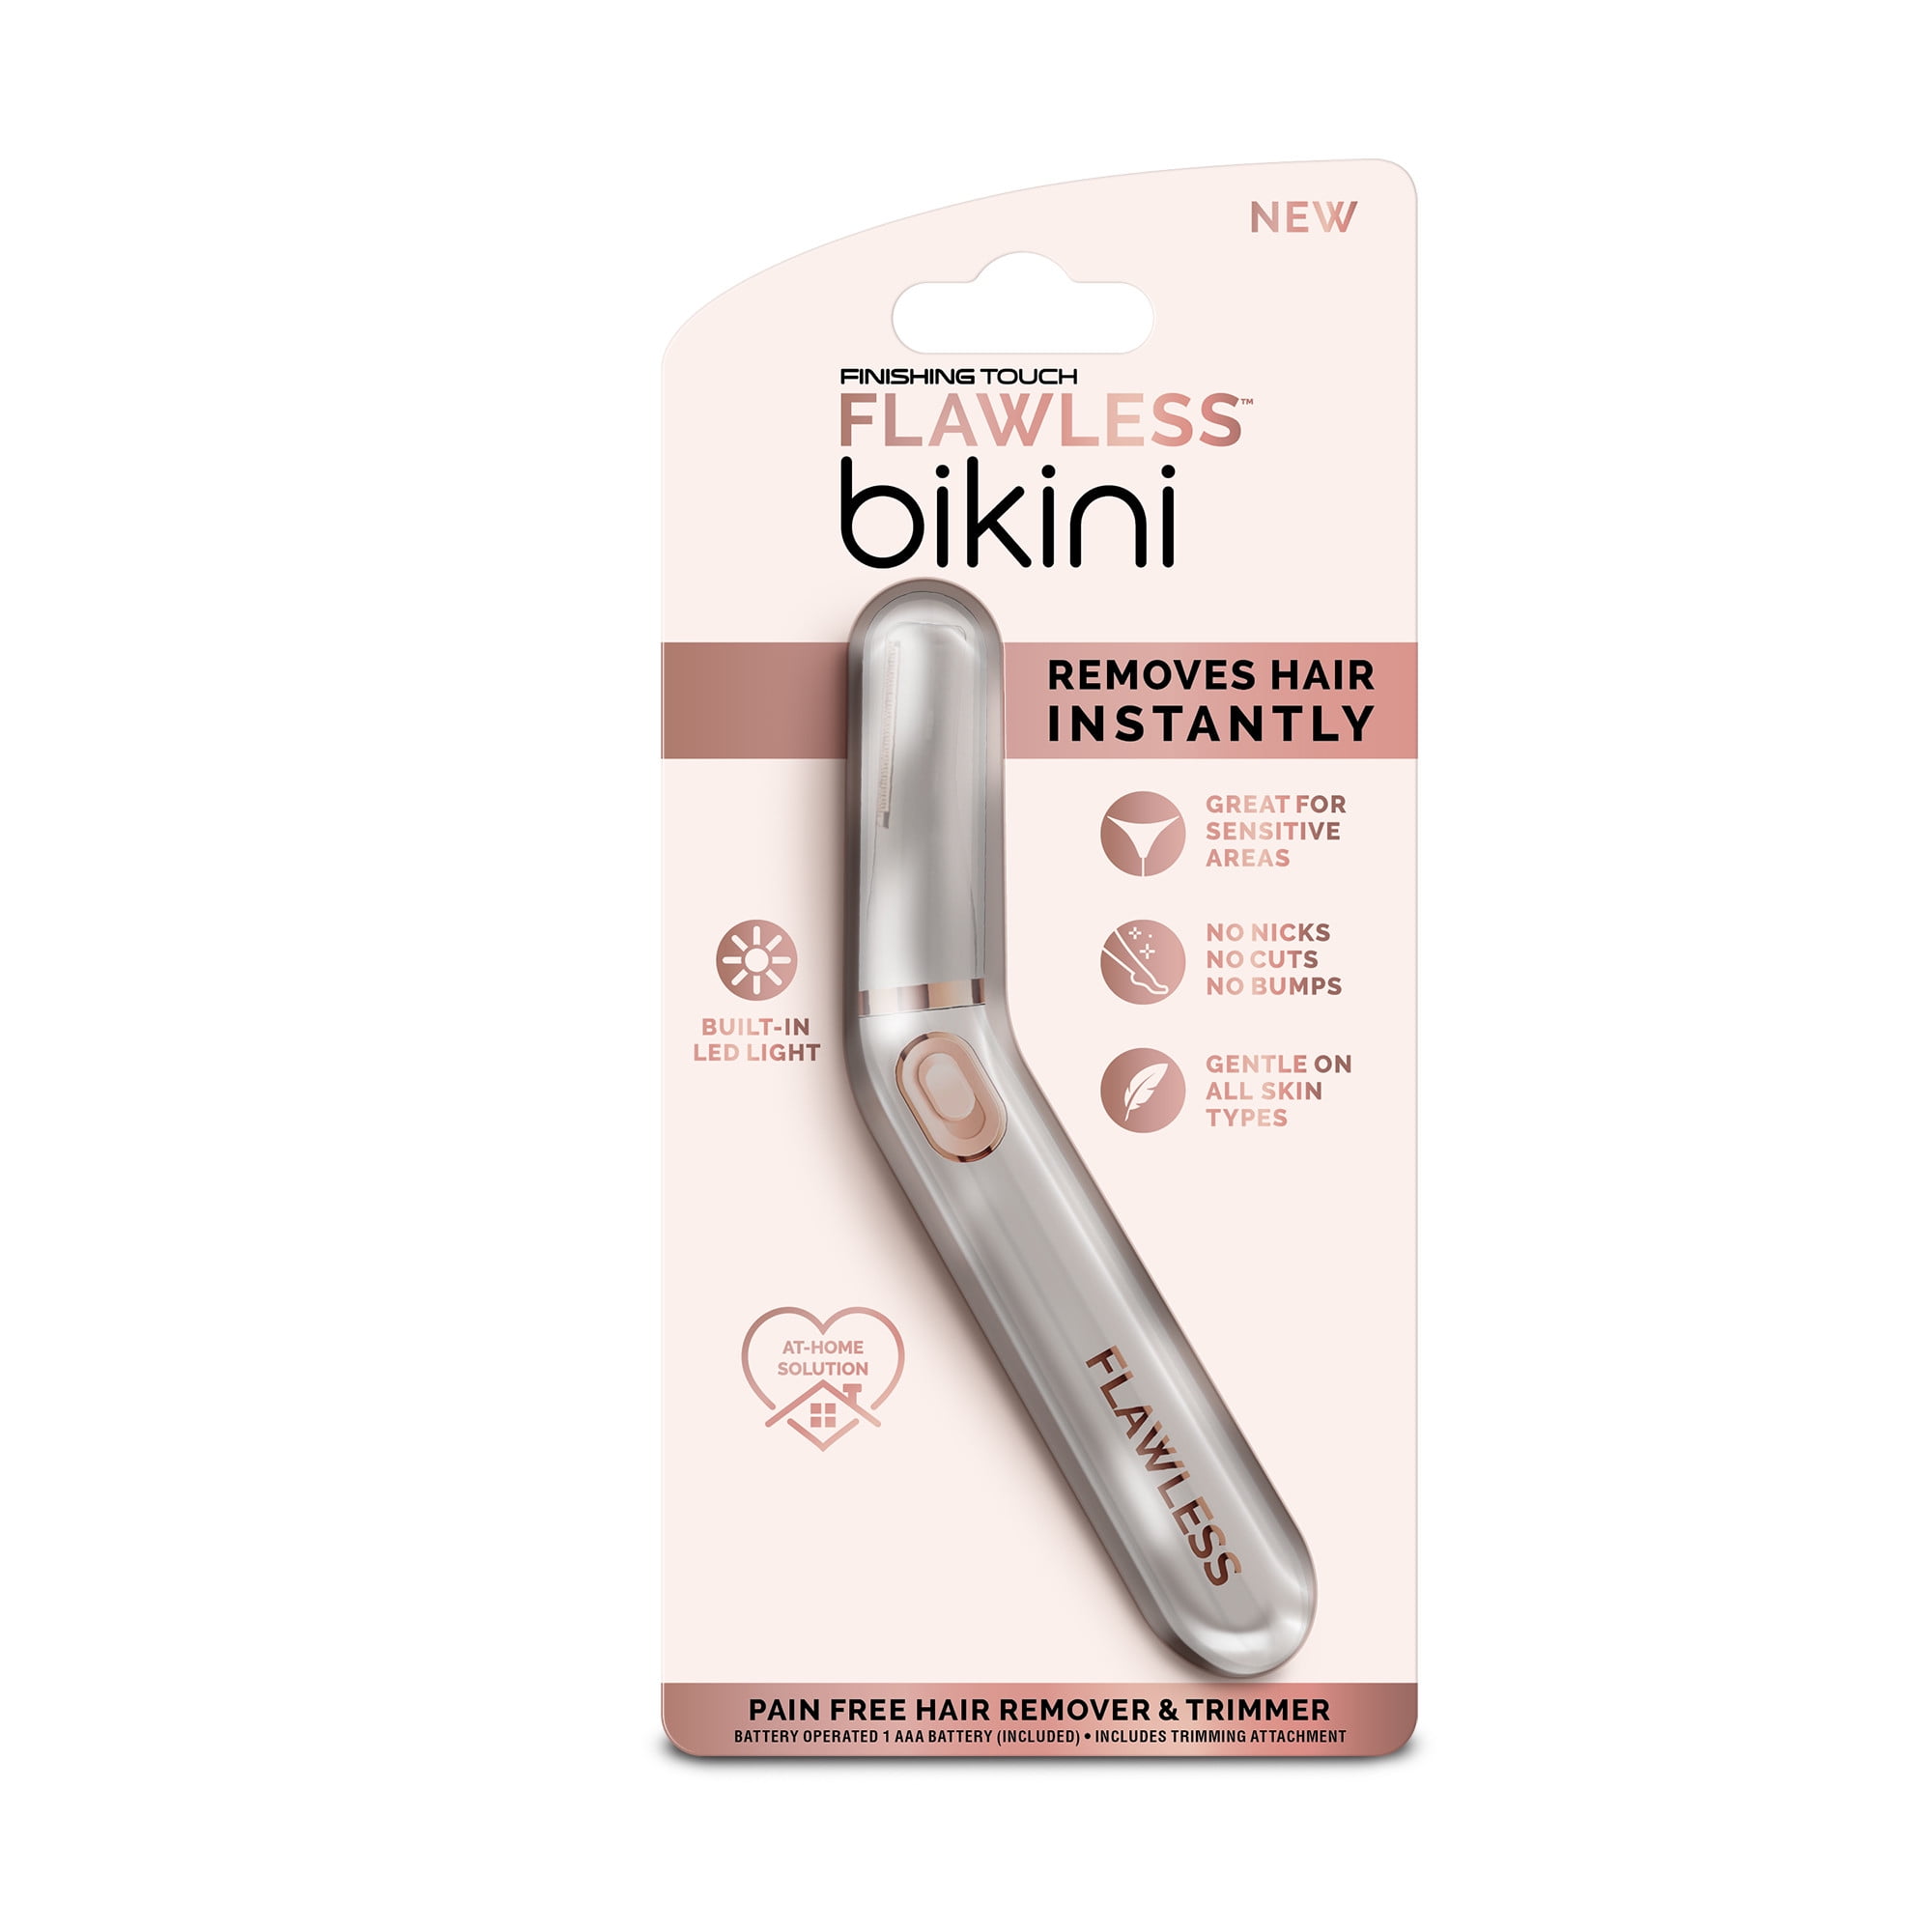 obligatorisk eventyr mareridt Finishing Touch Flawless Bikini Shaver and Trimmer Hair Remover for Women,  Dry Use Electric Razor, Personal Groomer for Intimate Ladies Shaving, No  Bump, Smooth Shave - Walmart.com